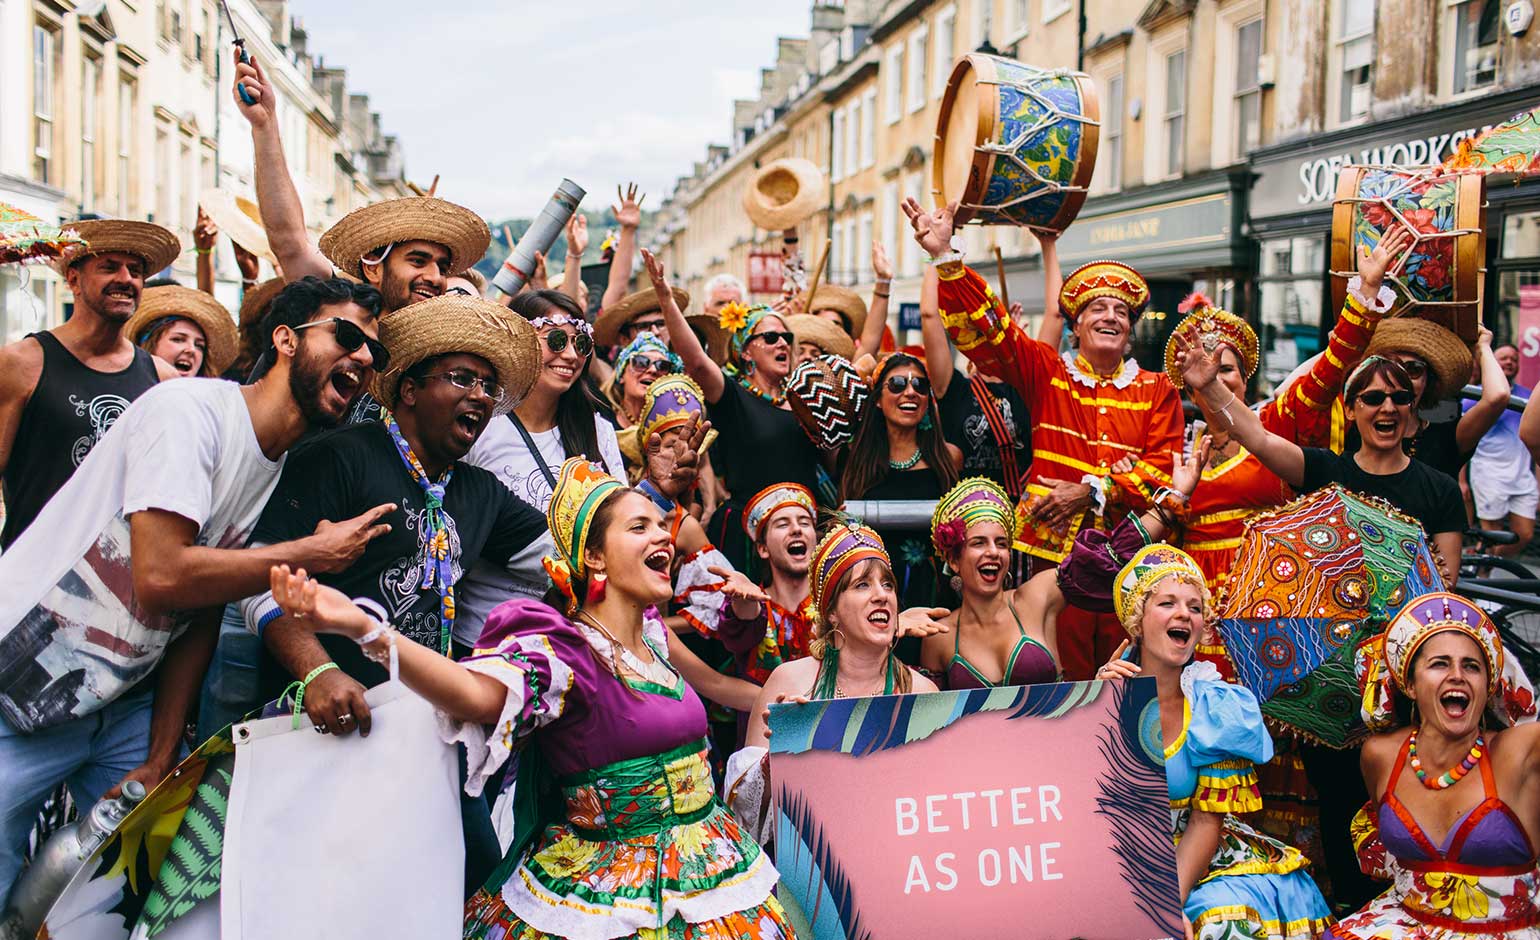 Emergency investment secured for Bath Carnival after funding blow